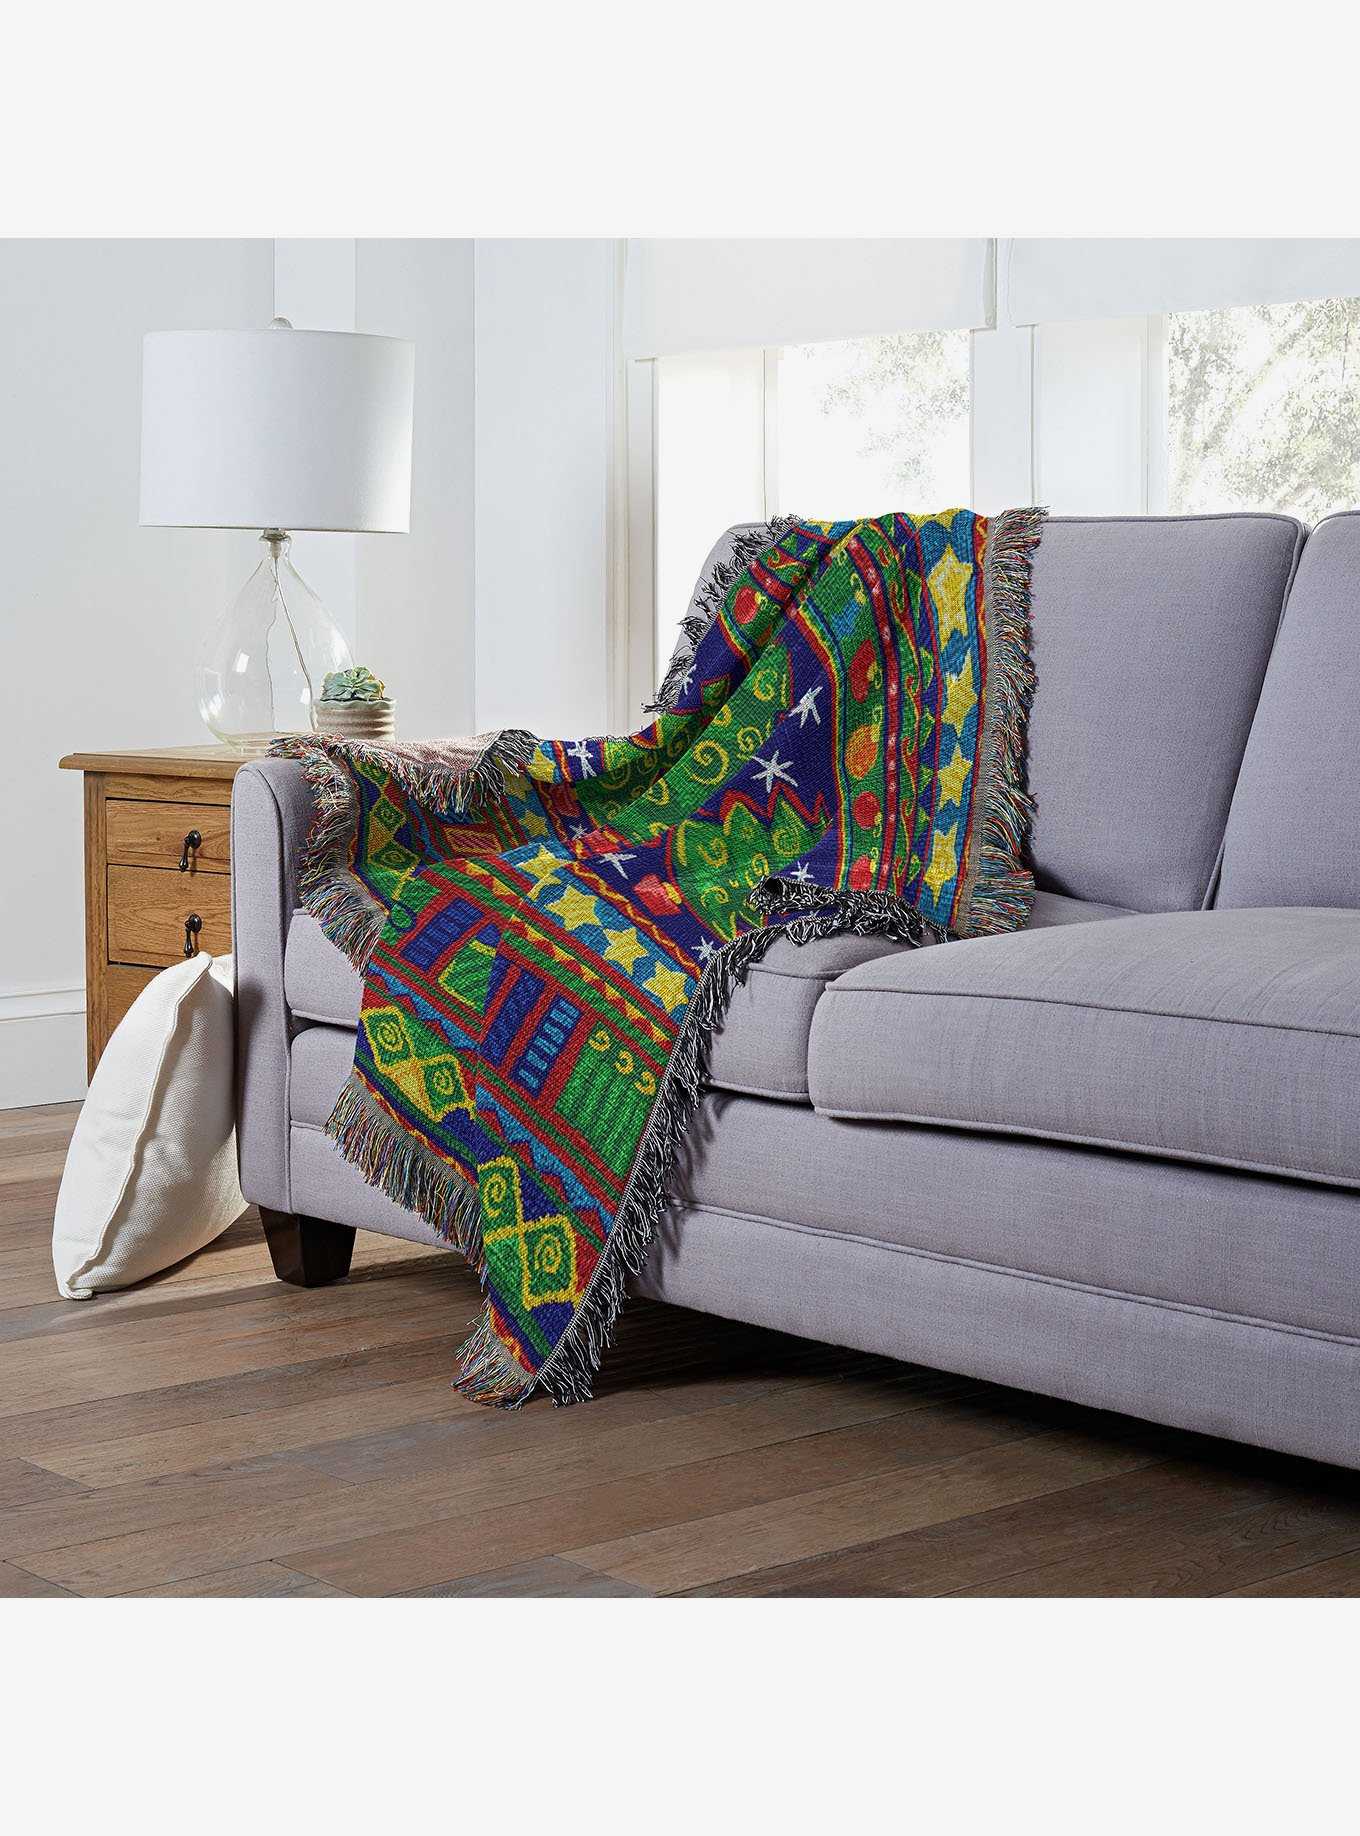 Tree Festivity Holiday Woven Tapestry Throw Blanket, , hi-res